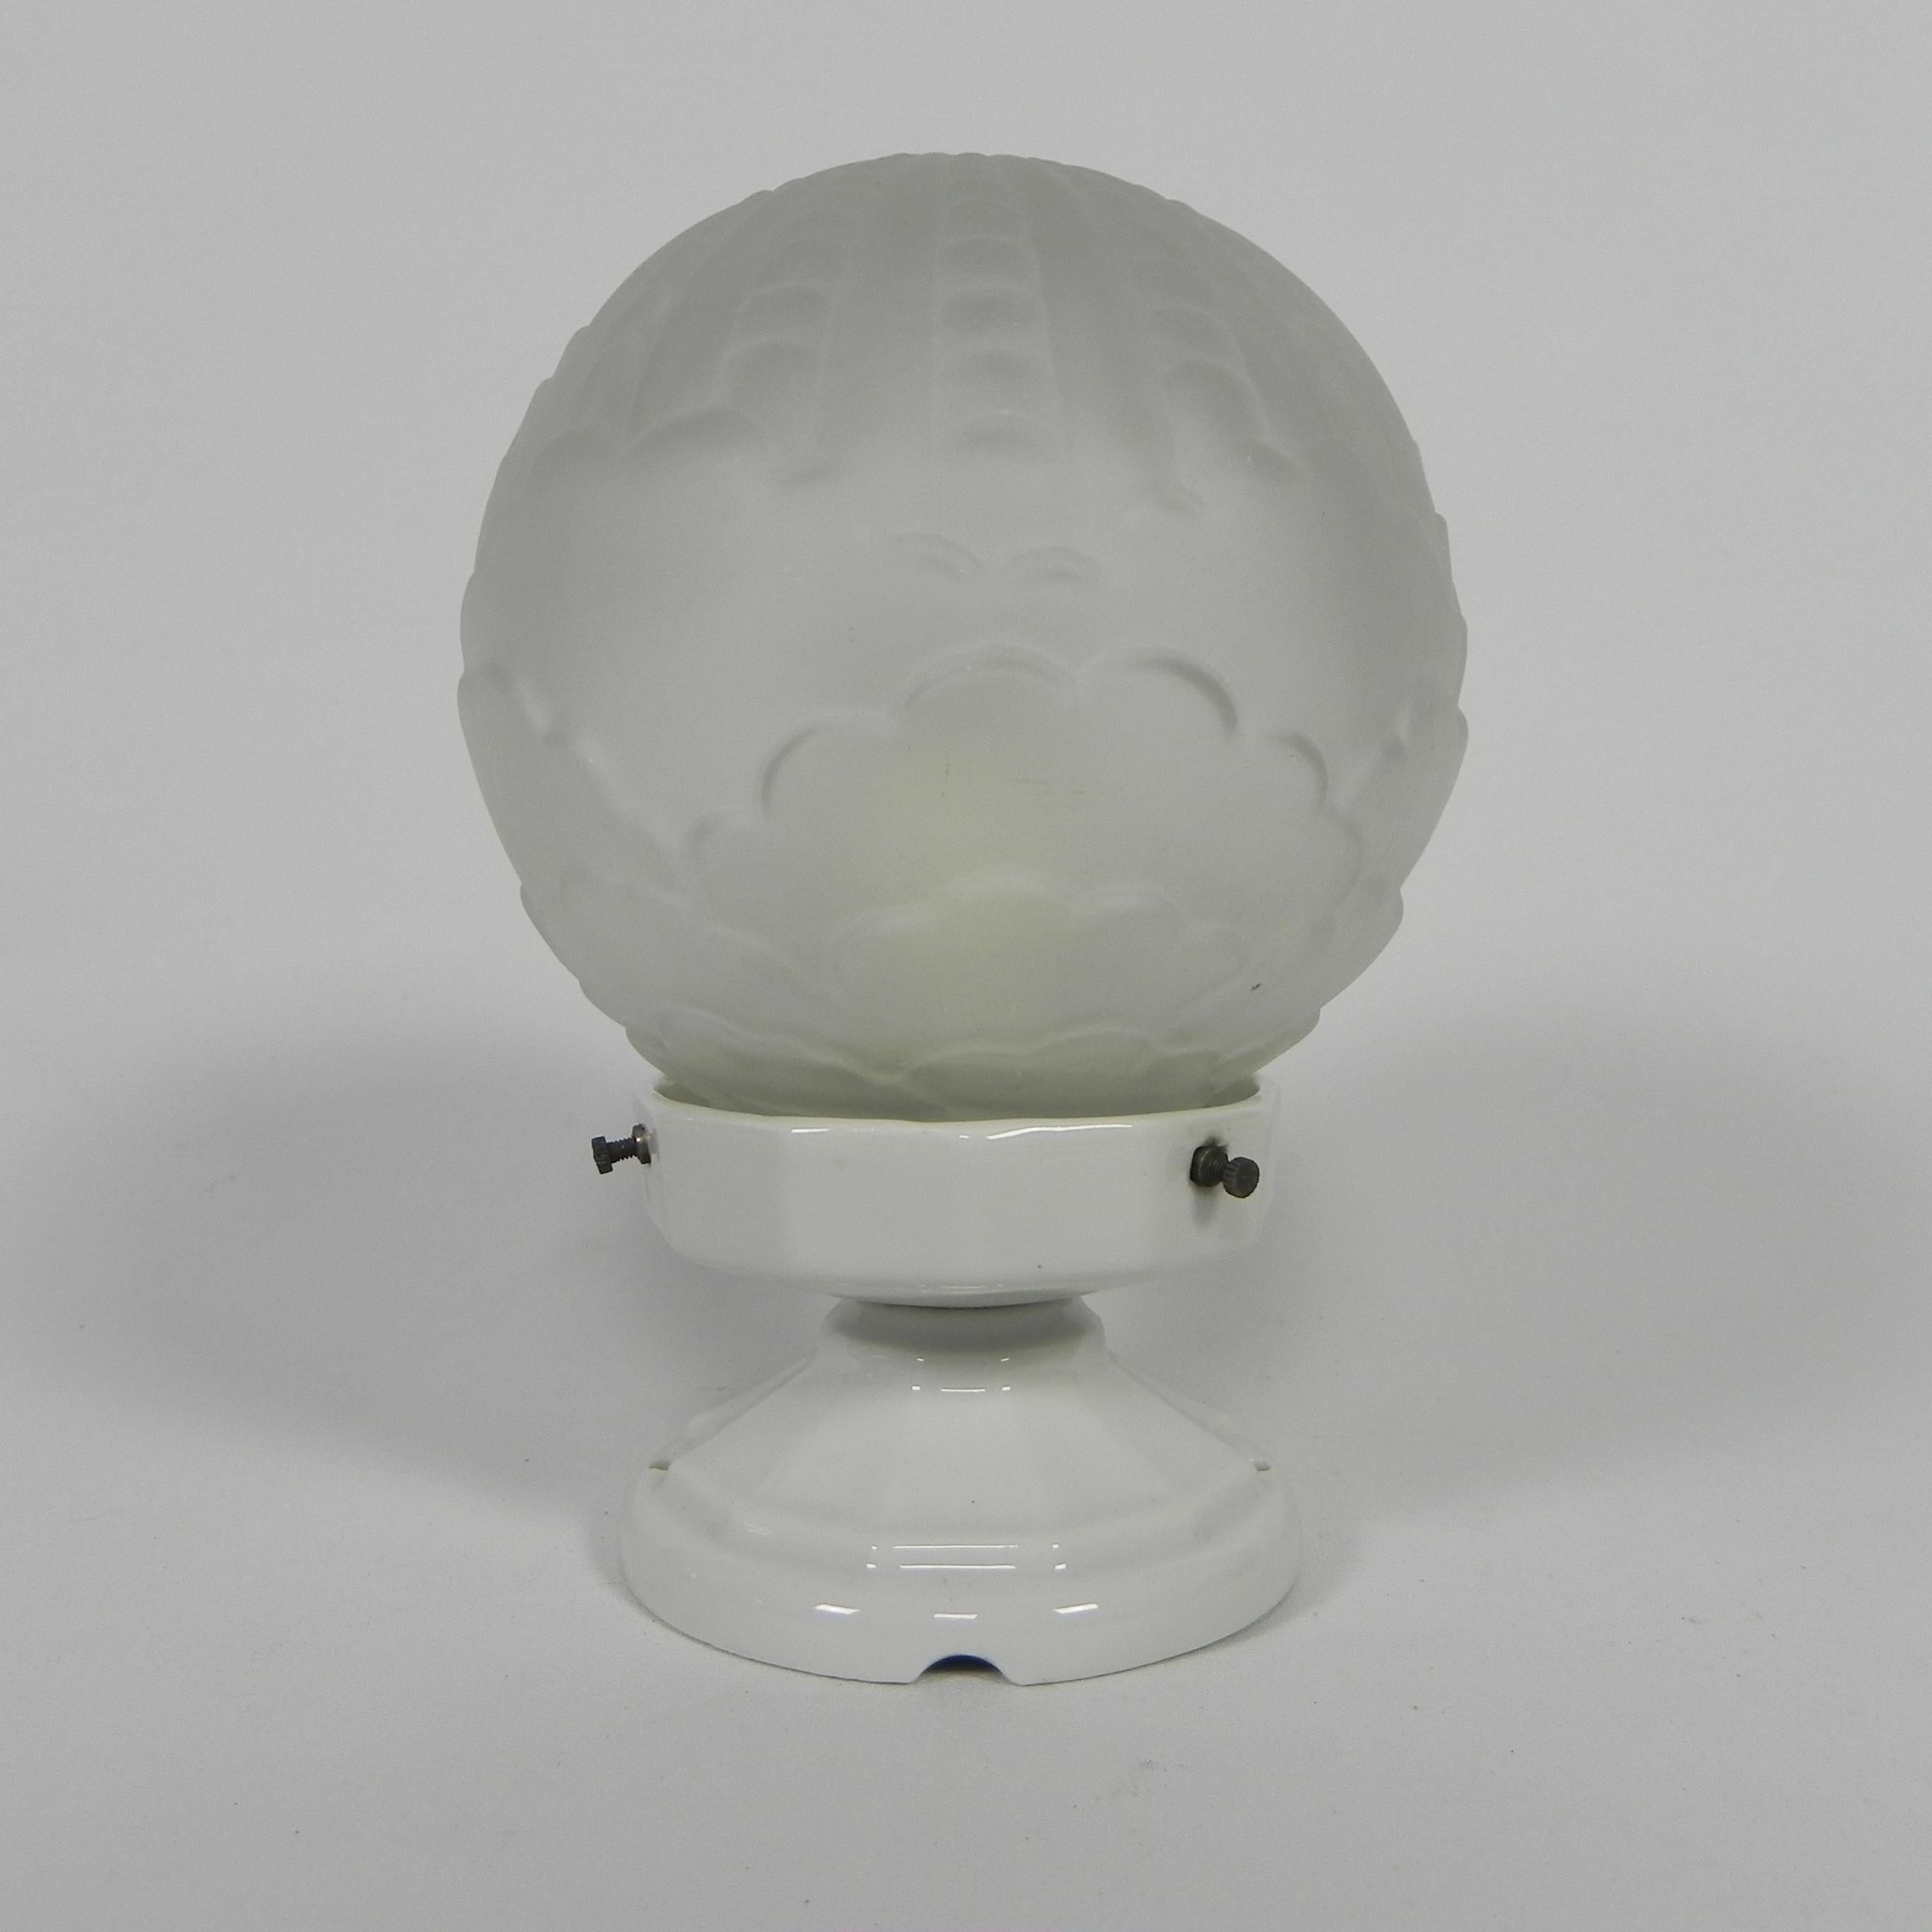 This ceiling lamp has a special porcelain holder
that can be attached to the ceiling with 2 screws

Total height: 20 cm.
Ø glass shade: 14 cm.
The lamp has a large fbulb holder (E27).
Origin: France, 1930s.
Material: porcelain / glass.